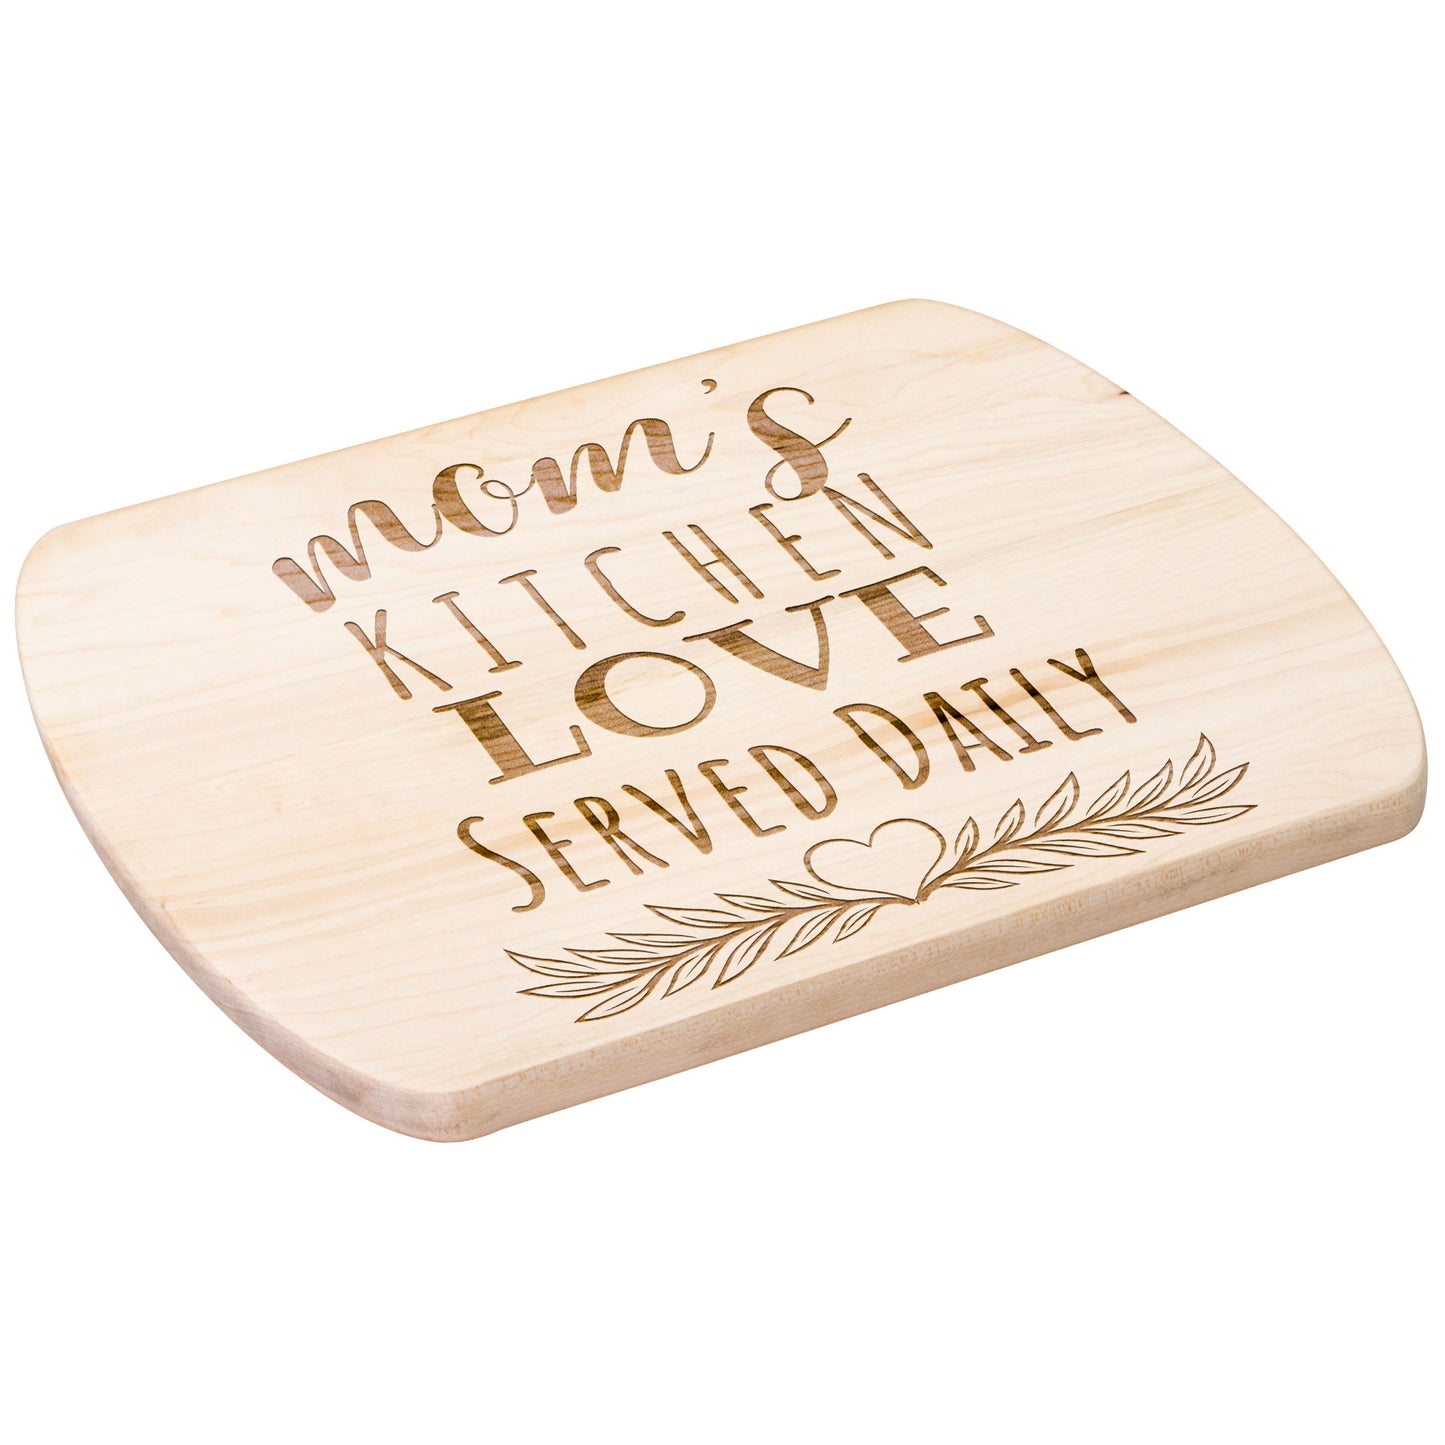 Cutting Board - Love Served Daily